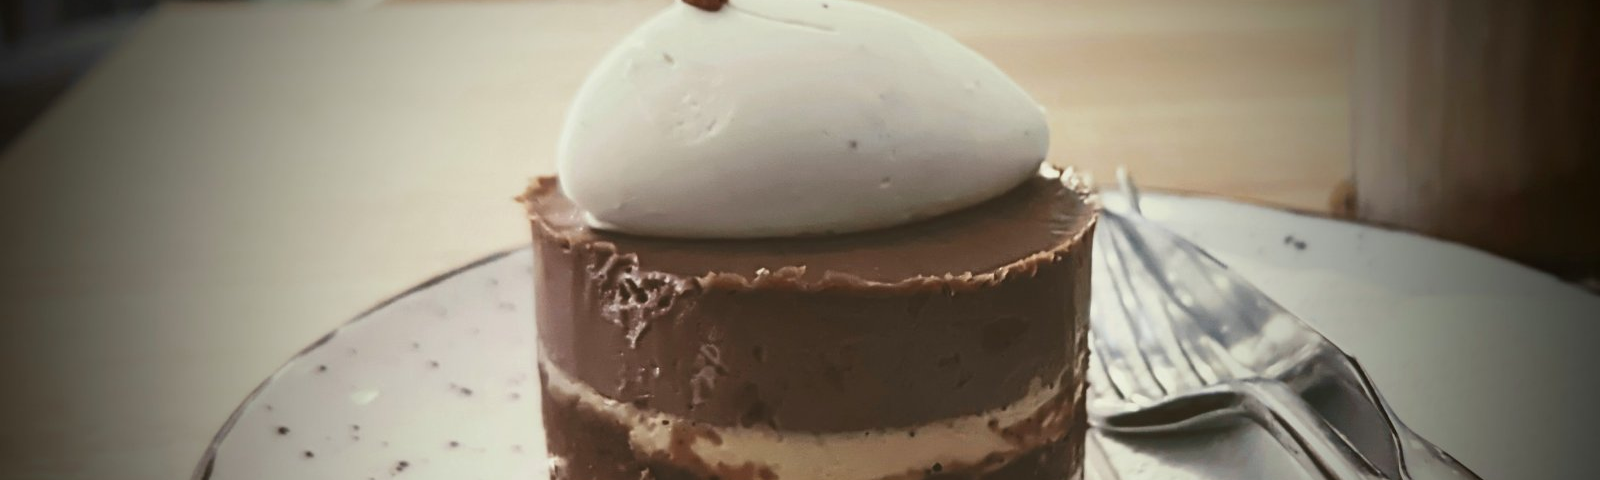 A picture of a creamy chocolate cake with cream on the top served on a plate with a fork and knife.